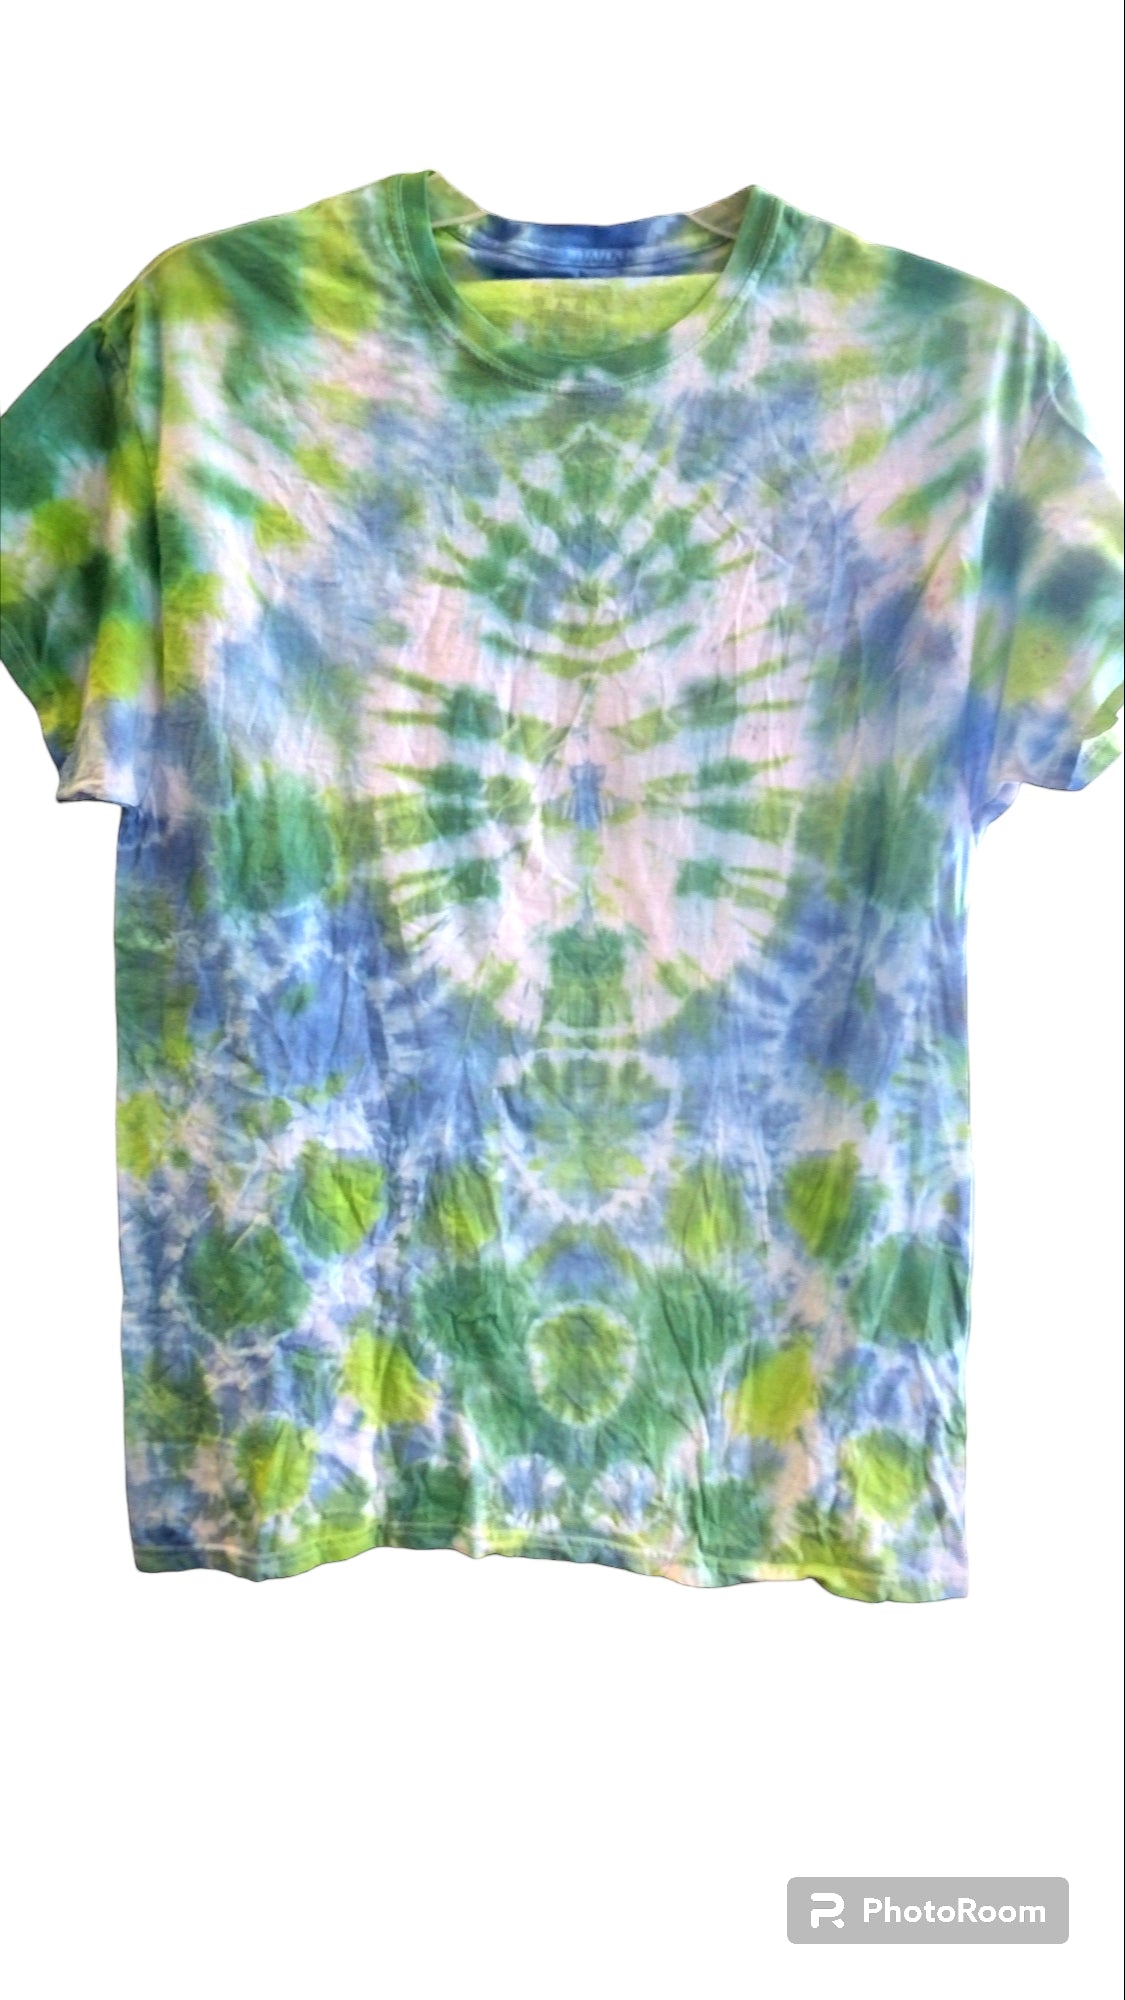 Green and Blue Tie Dye T-shirt